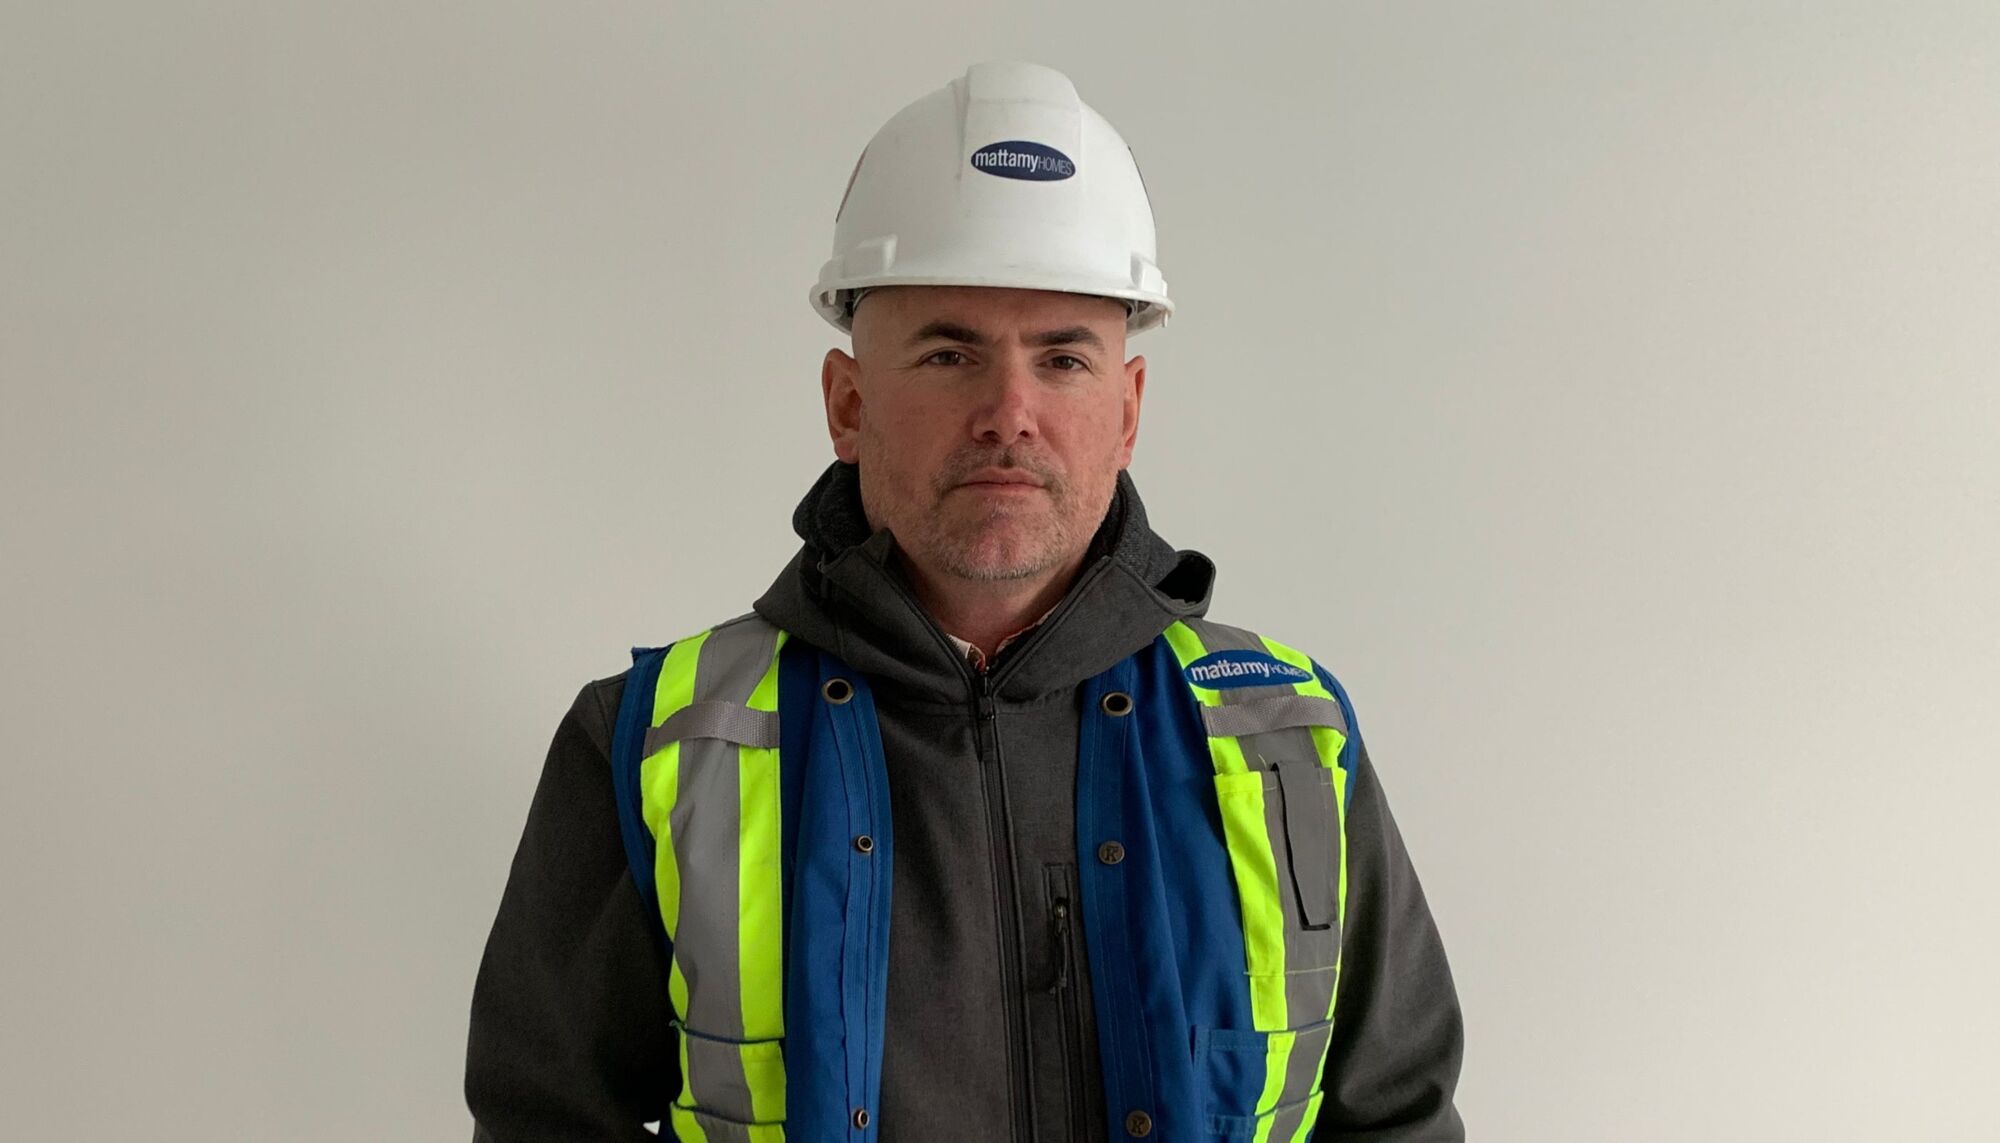 Male indoors wearing safety vest and hard hat